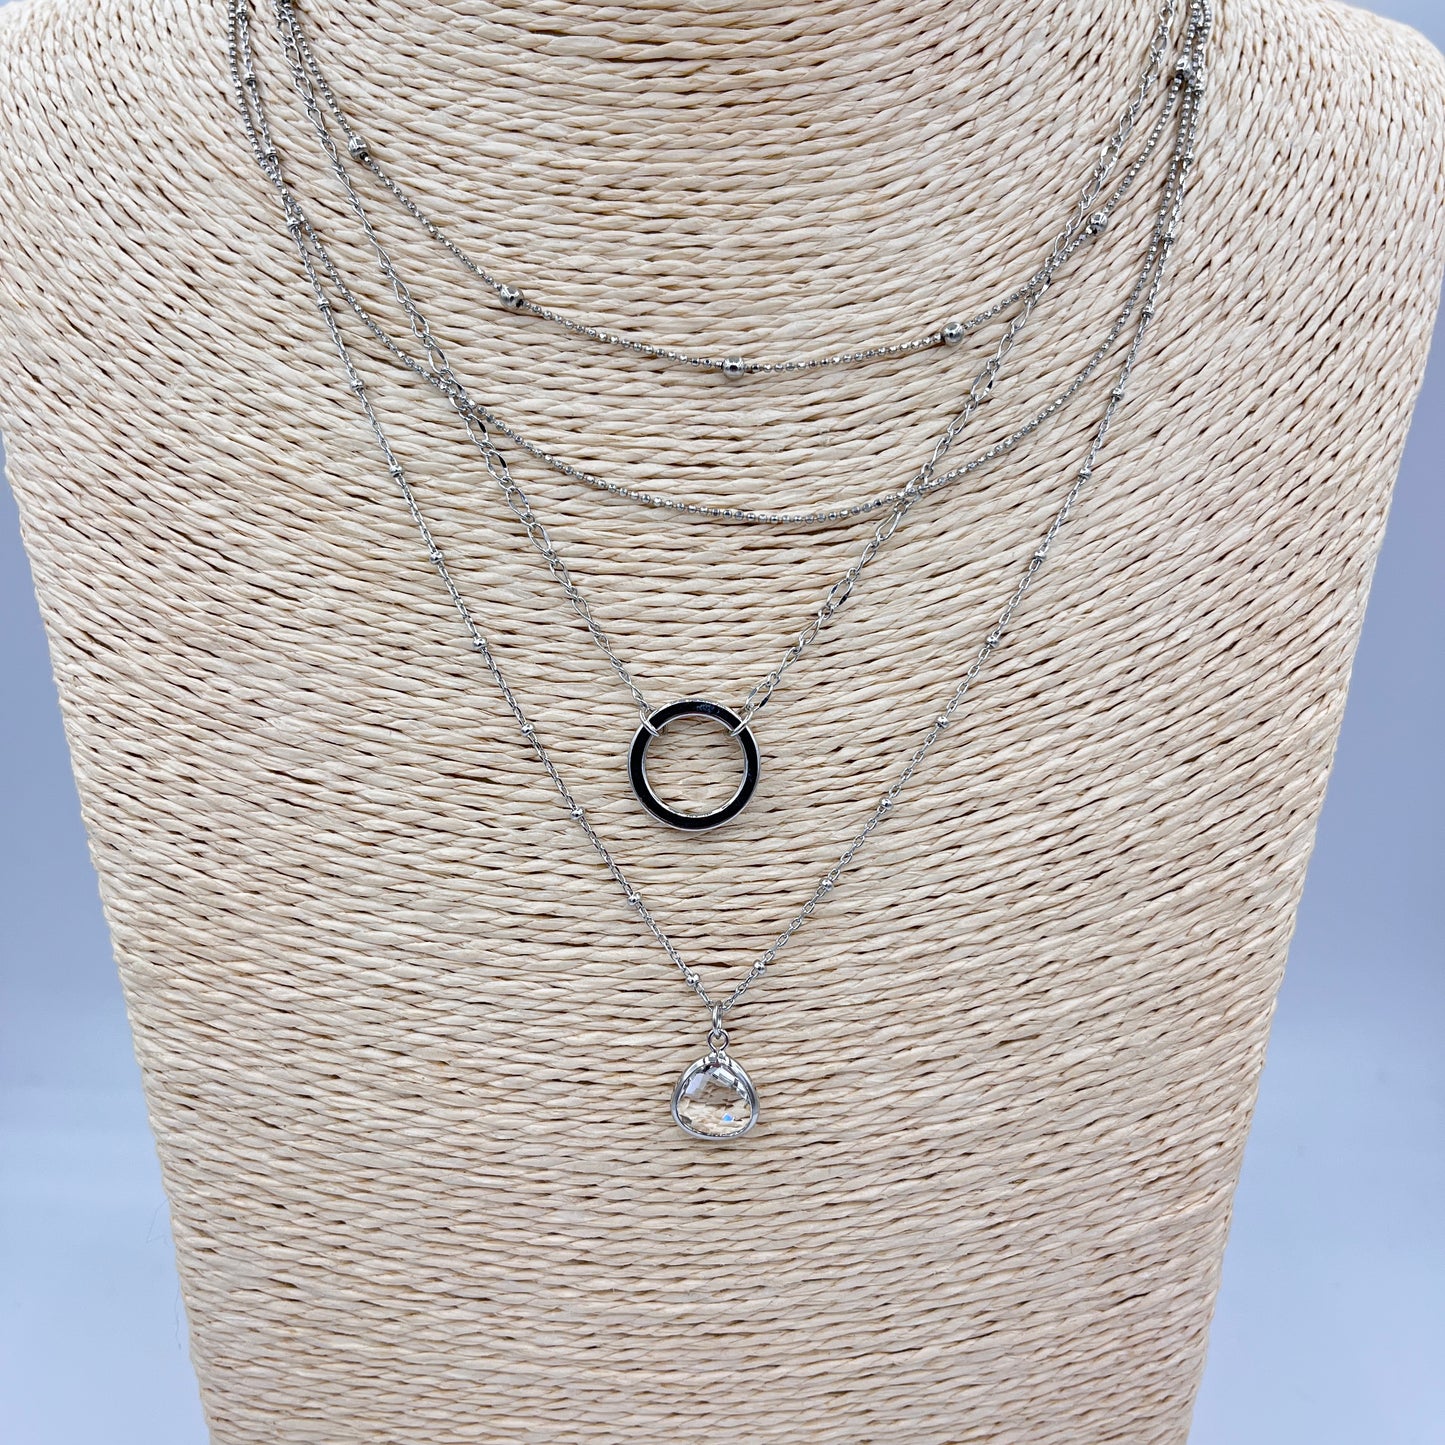 SILVER 4 LAYERED NECKLACE WITH CRYSTAL PENDANT & CIRCLE PAVER